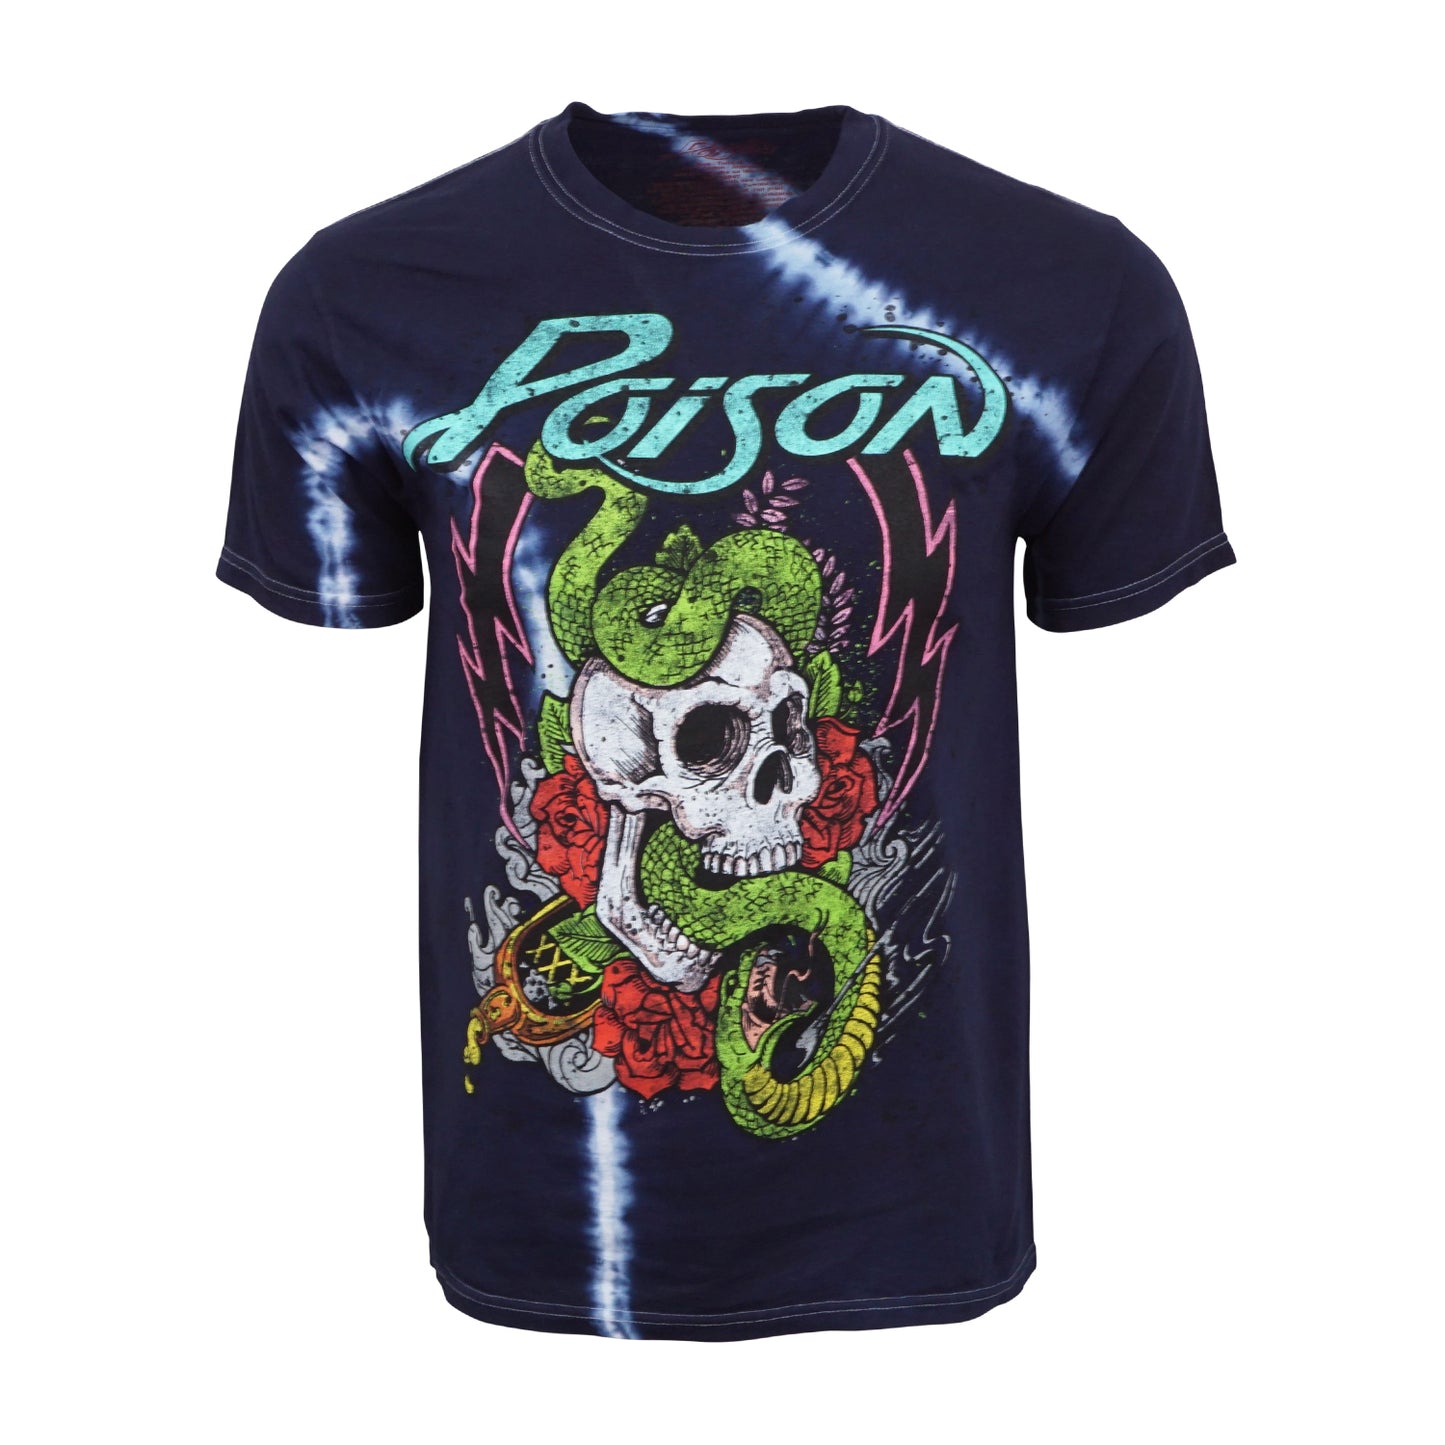 Poison Band Music Graphic T shirt